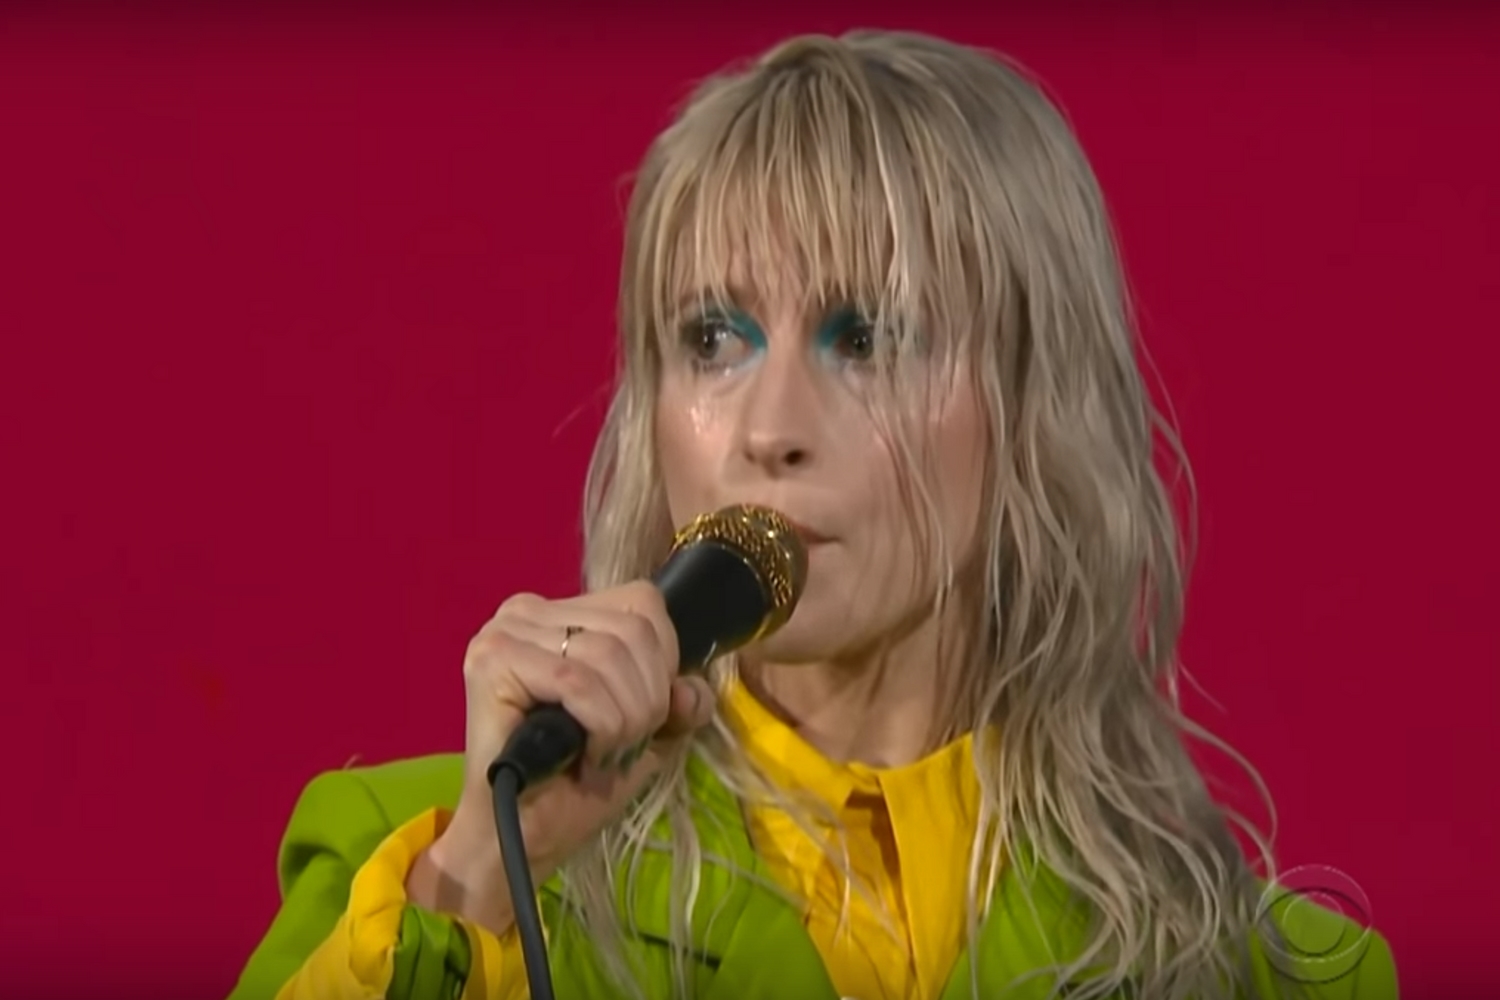 Watch Paramore bring ‘Rose Colored Boy’ to Colbert